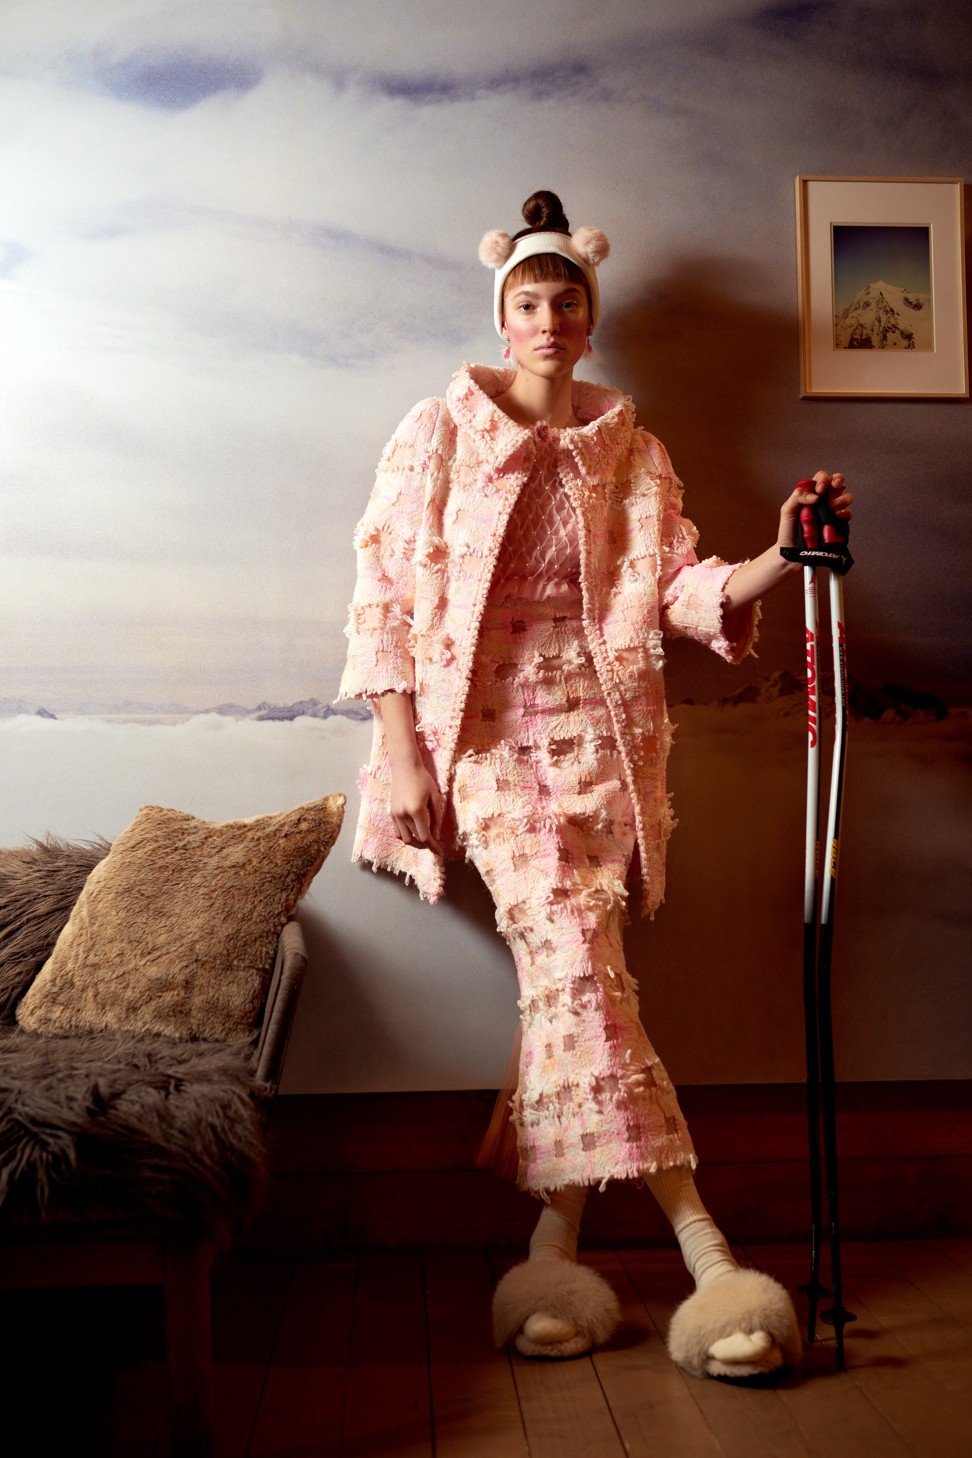 Chanel Haute Couture long coat and dress in pink lace, embroidered with twisted muslin; top of the dress in manually smocked organza, embellished with mother-of-pearl beads; stones and mother-of-pearl earrings and hairpins, embellished with small feathers bouquets by Lemarie and Desrues; Peauluxe slippers; stylist’s own headpiece; Atomic ski poles